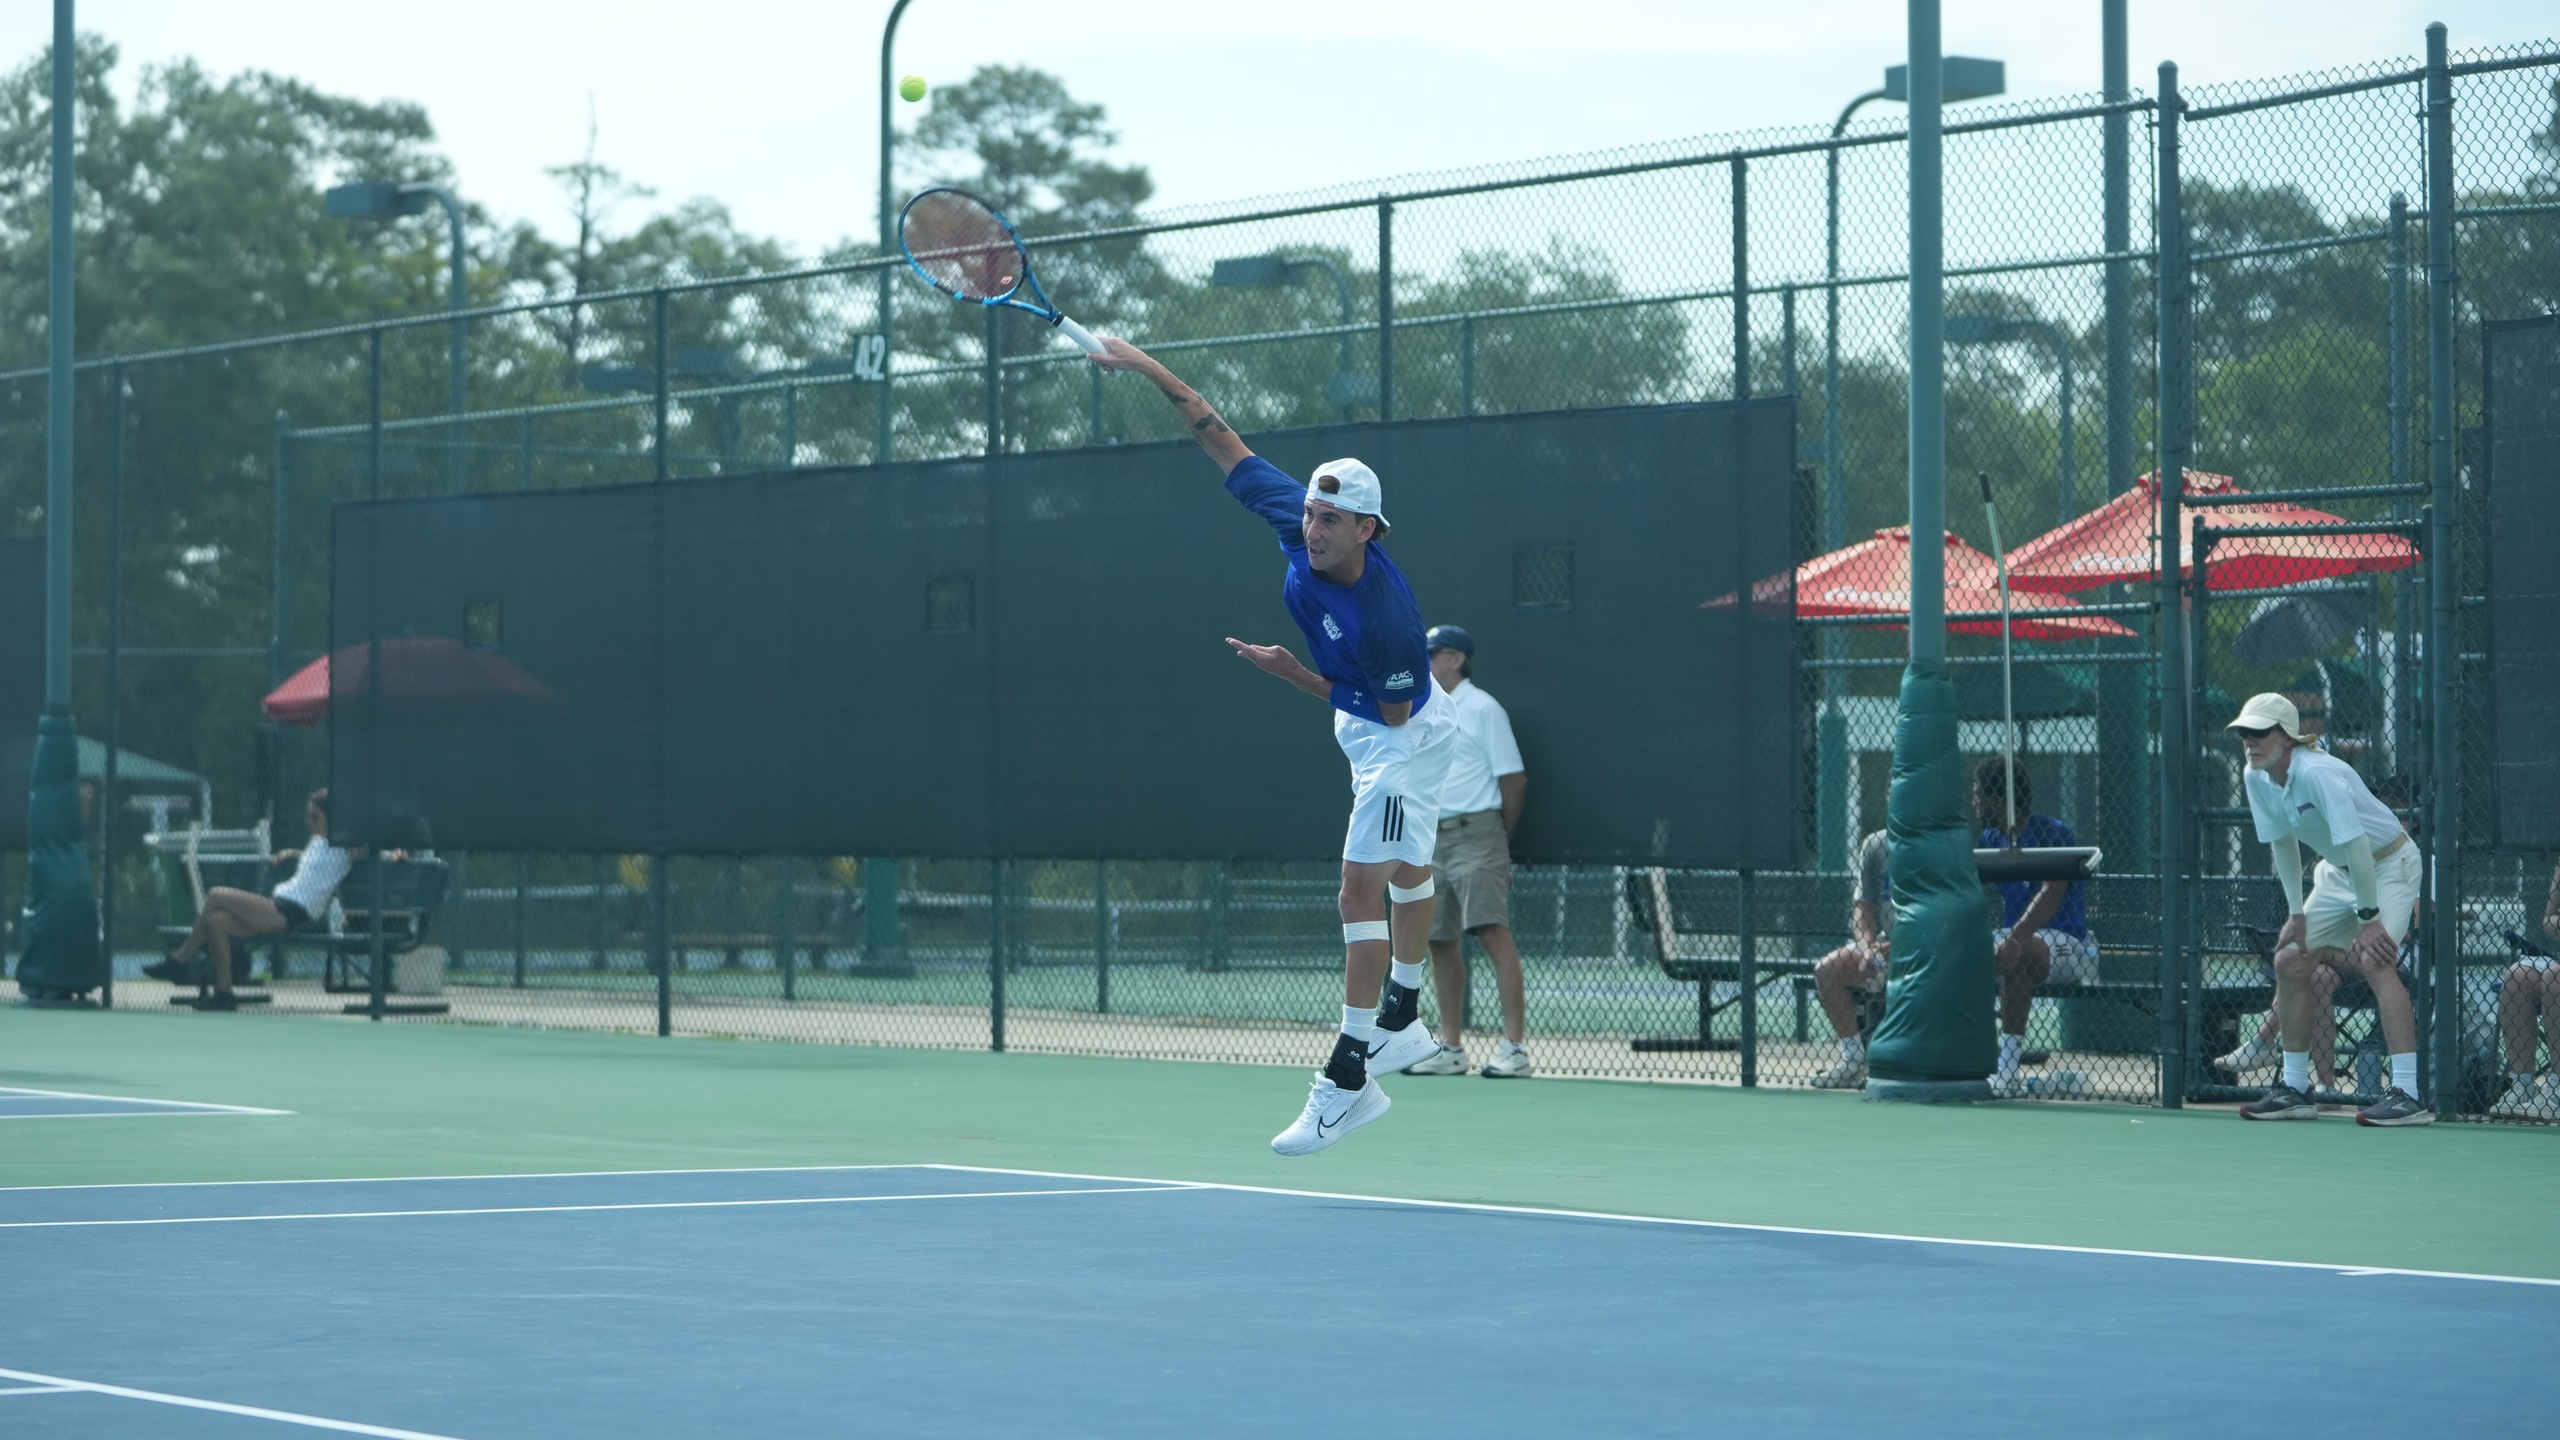 No. 2 Seed Men's Tennis Moves to Semifinals of NAIA Tournament for Fourth Year in a Row